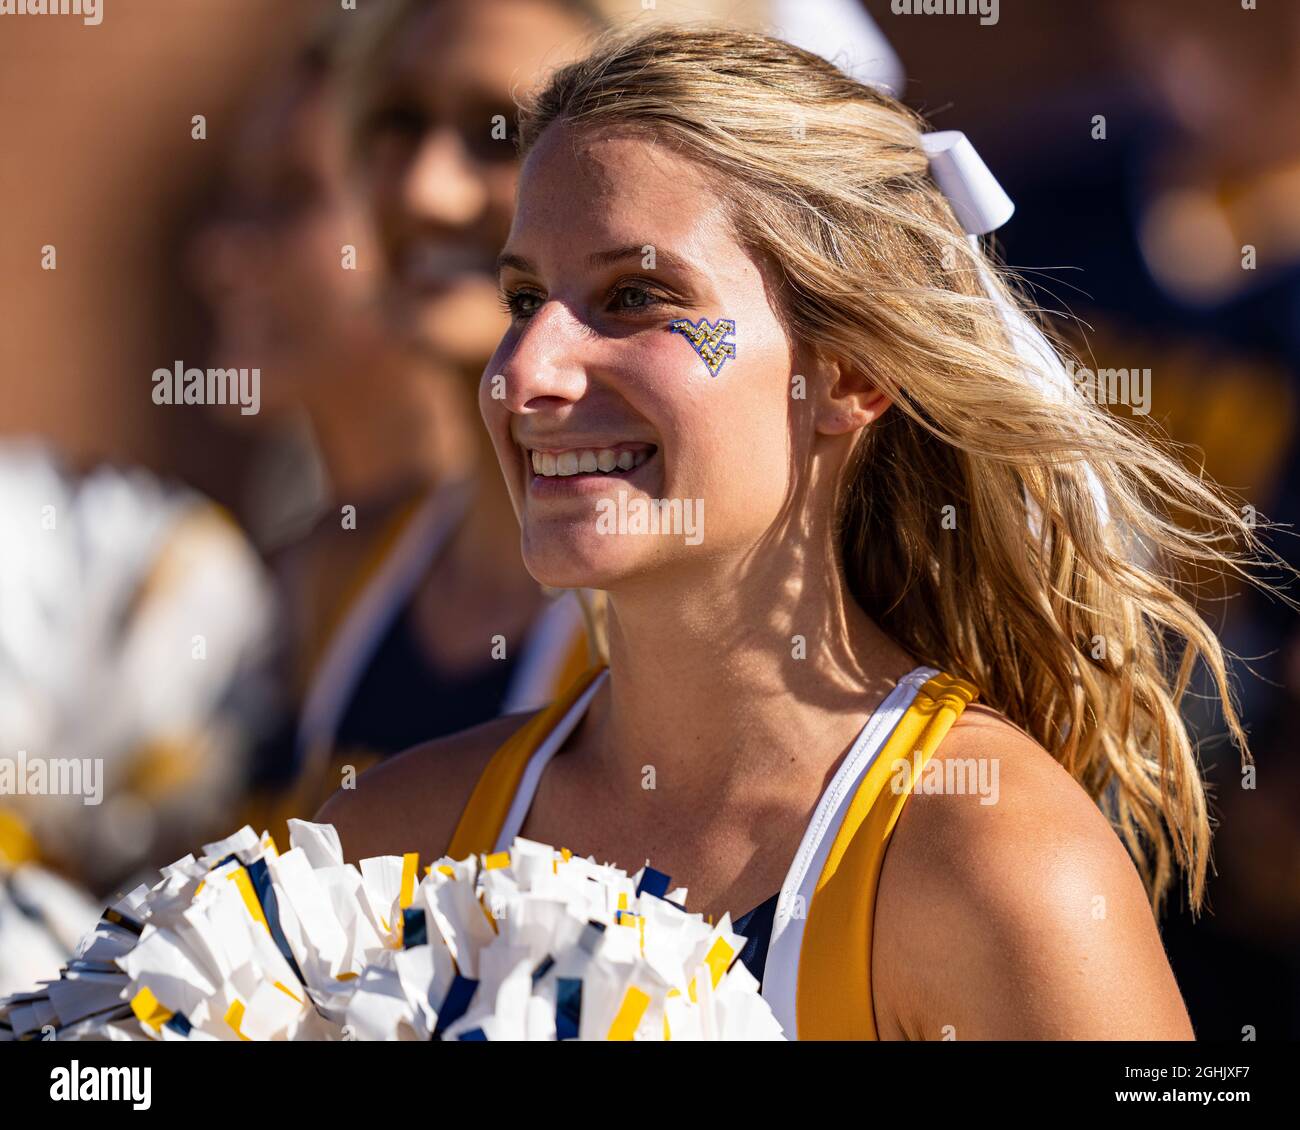 A West Virginia Mountaineers cheerleader looks on during the NCAA college football game between West Virginia and Maryland on Saturday September 4, 2021 at Capital One Field at Maryland Stadium in College Park, MD. Jacob Kupferman/CSM Stock Photo